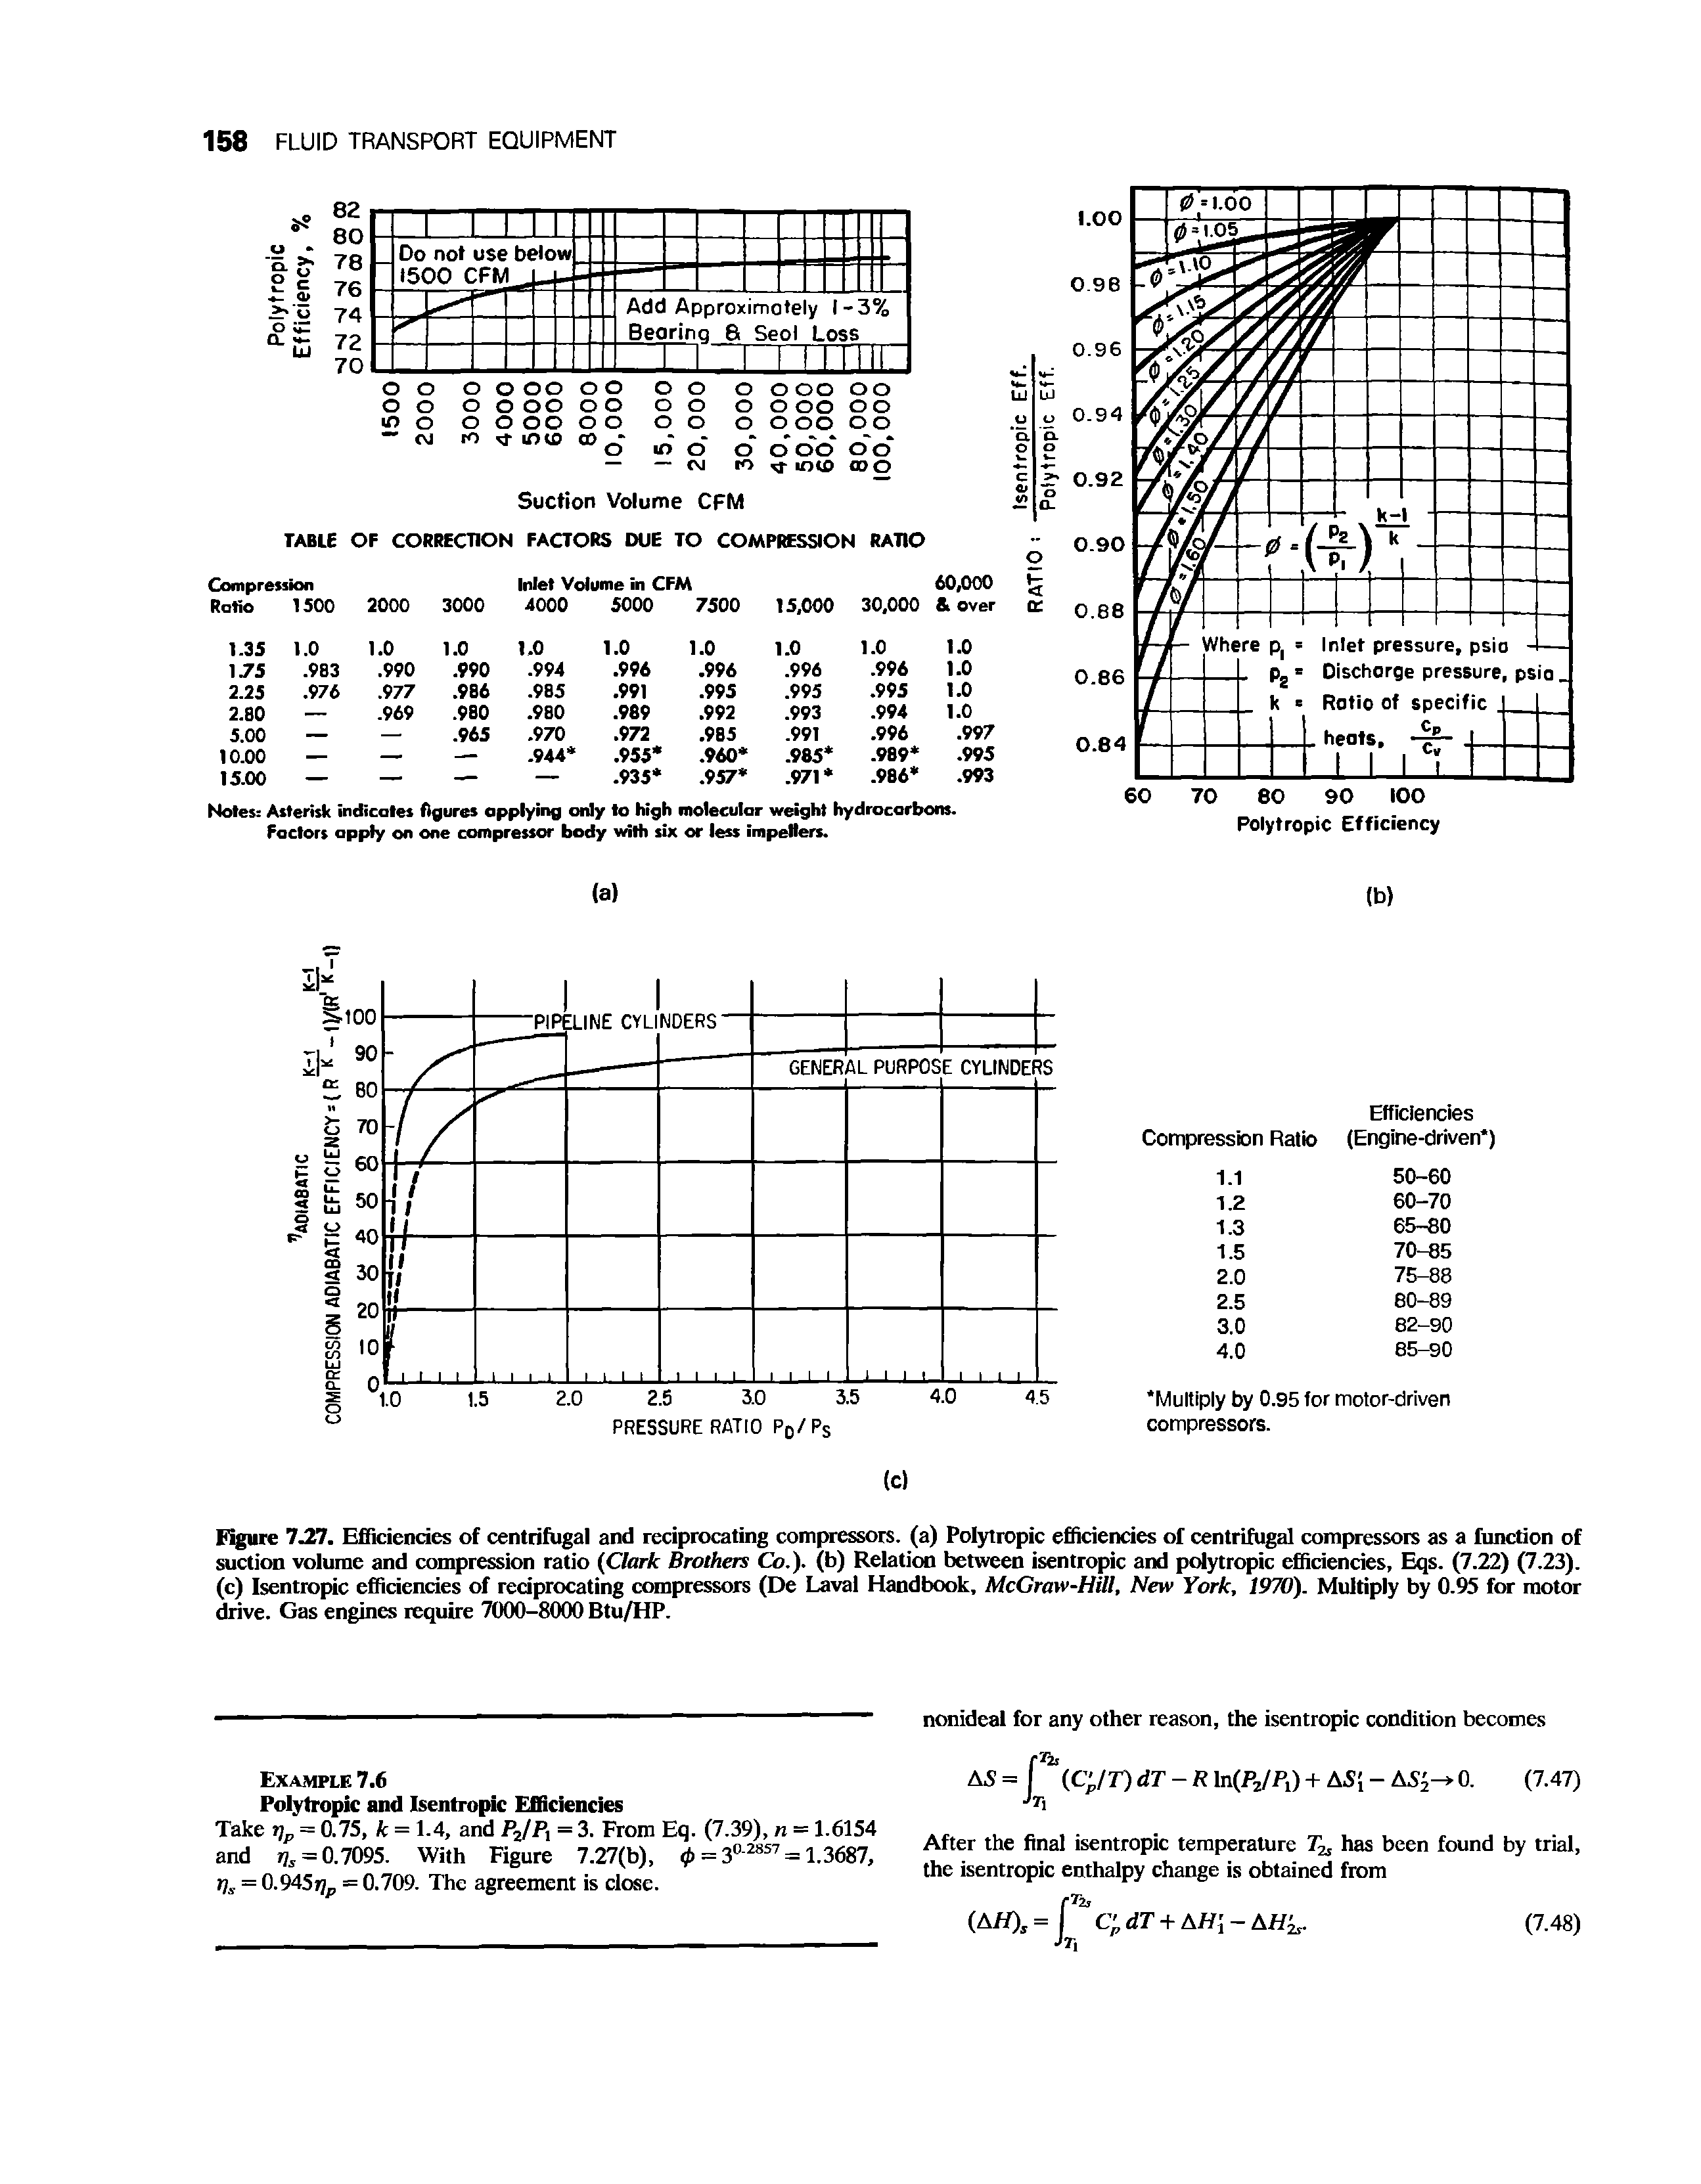 Figure 7.27. Efficiencies of centrifugal and reciprocating compressors, (a) Polytropic efficiencies of centrifugal compressors as a function of suction volume and compression ratio (Clark Brothers Co.), (b) Relation between isentropic and polytropic efficiencies, Eqs. (7.22) (7.23). (c) Isentropic efficiencies of reciprocating compressors (De Laval Handbook, McGraw-Hill, New York, 1970). Multiply by 0.95 for motor drive. Gas engines require 7000-8000 Btu/HP.